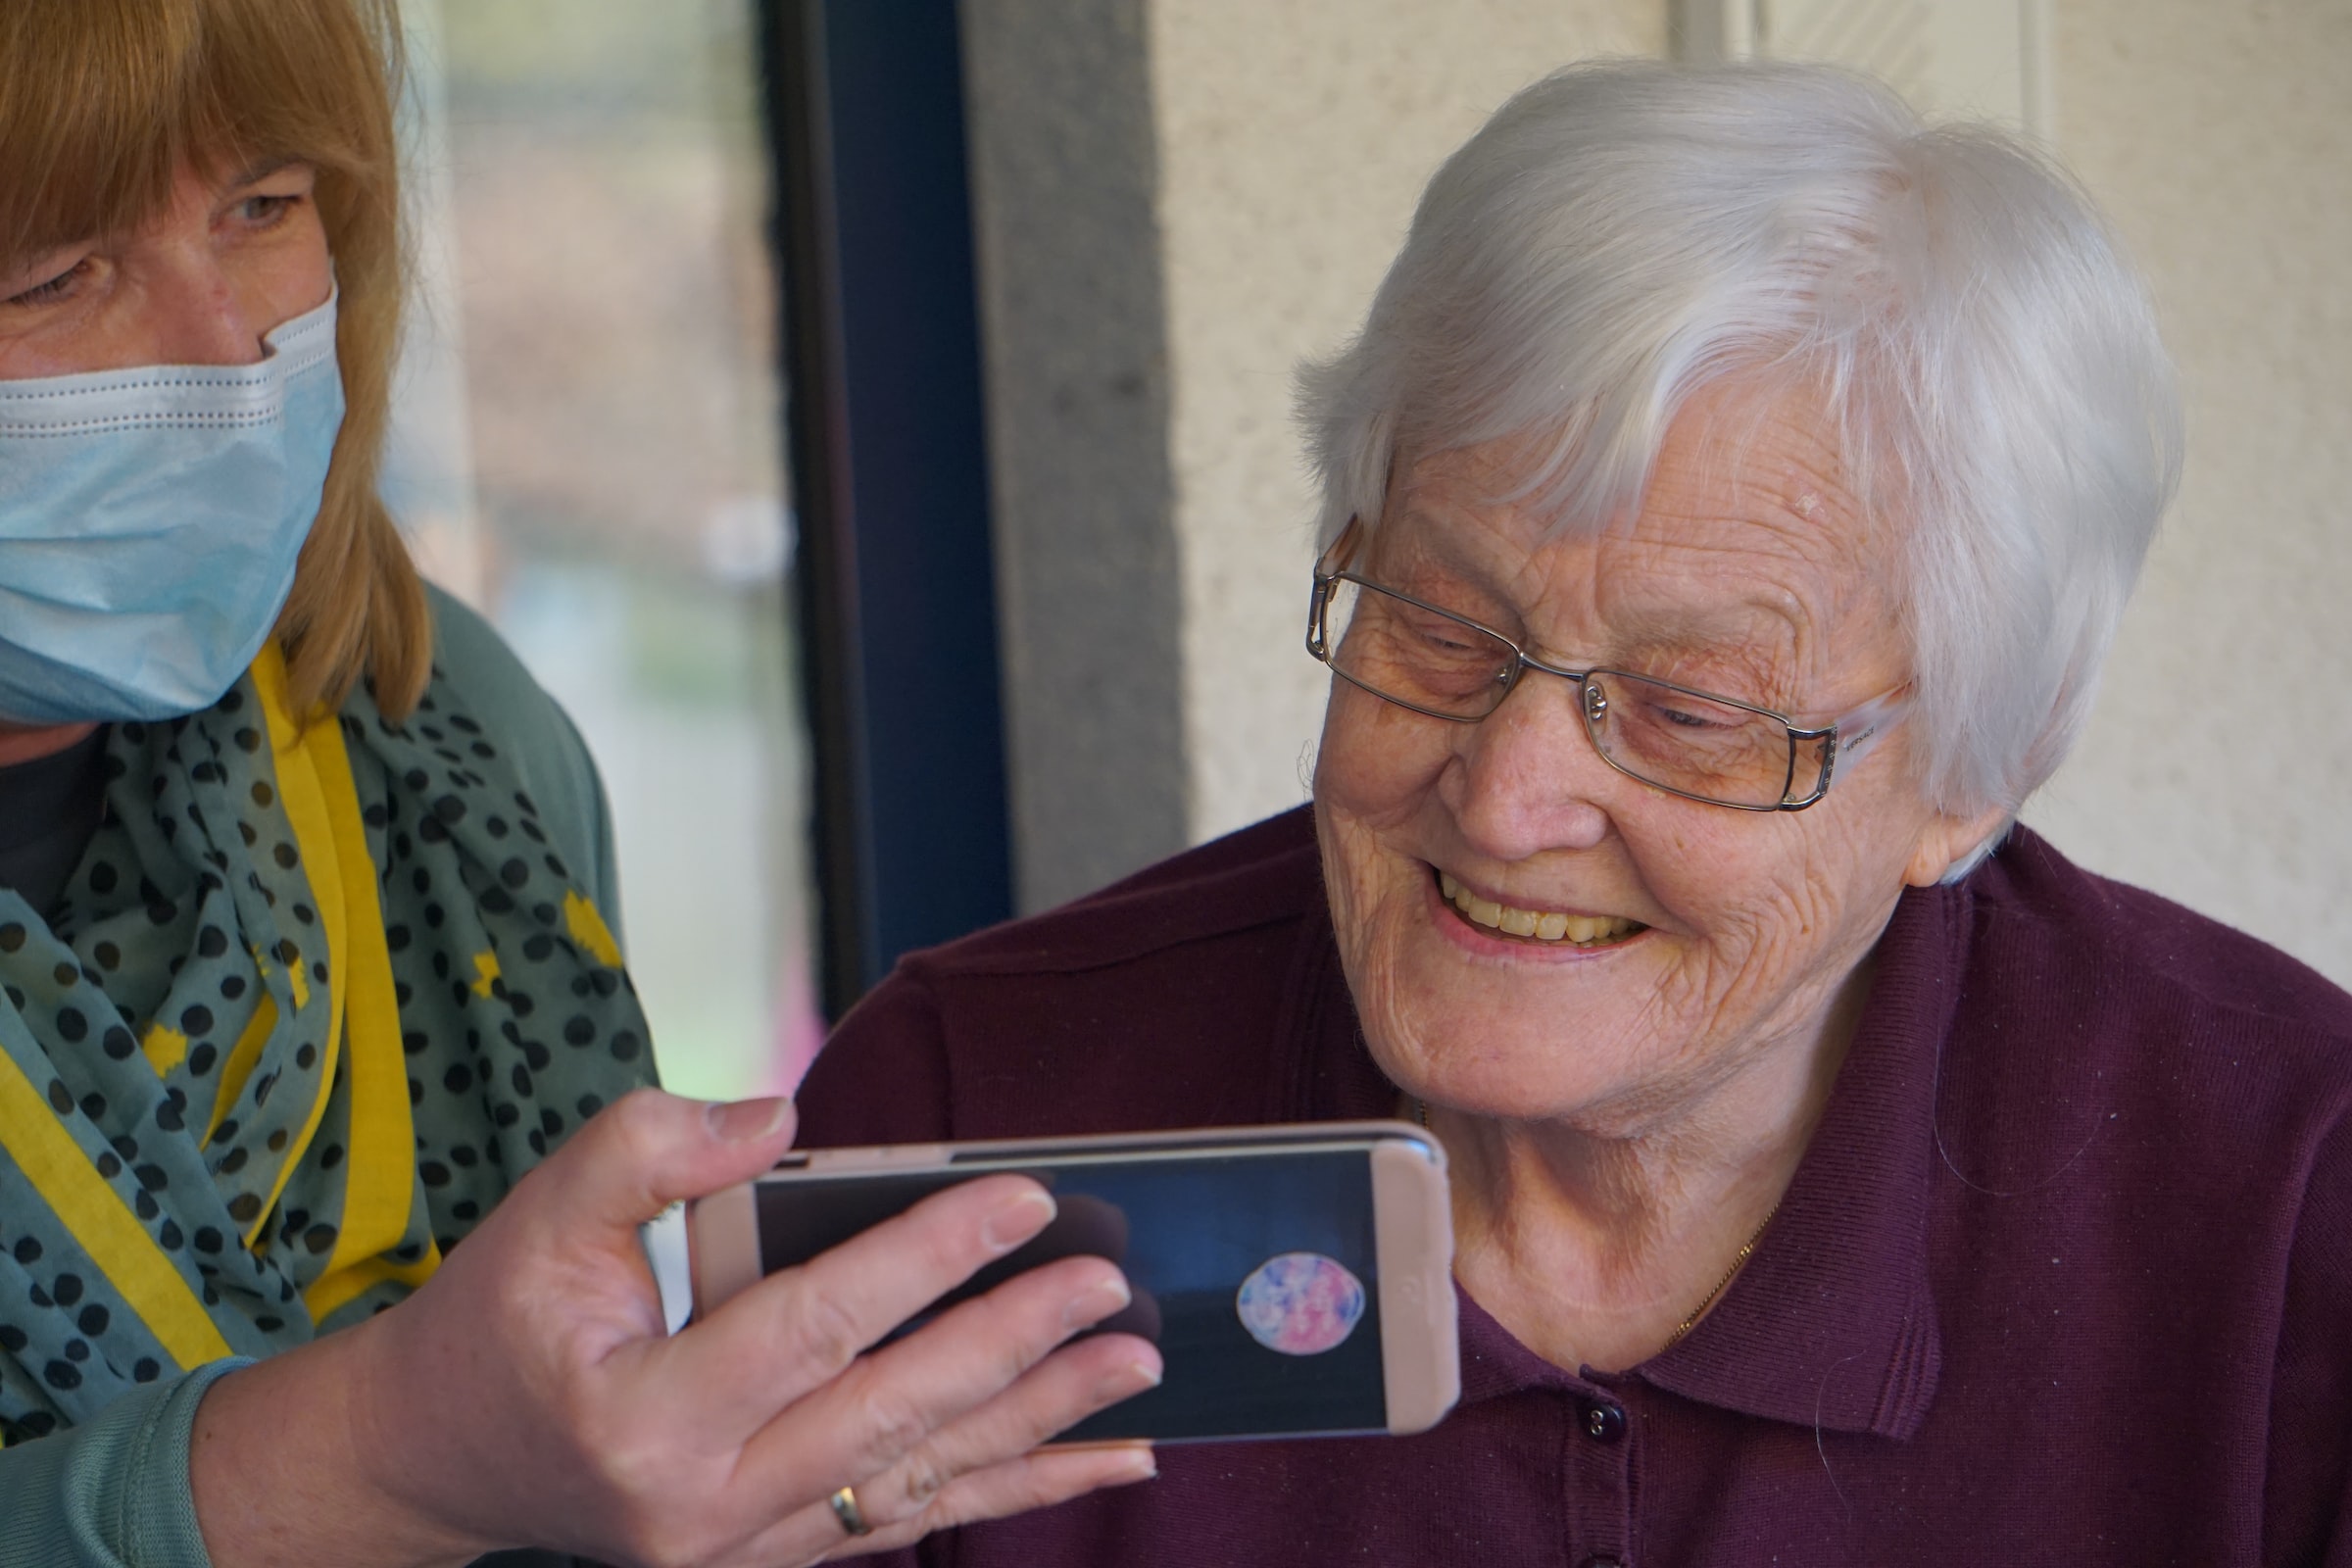 Housing Providers to Consult with Elderly Over New Technology